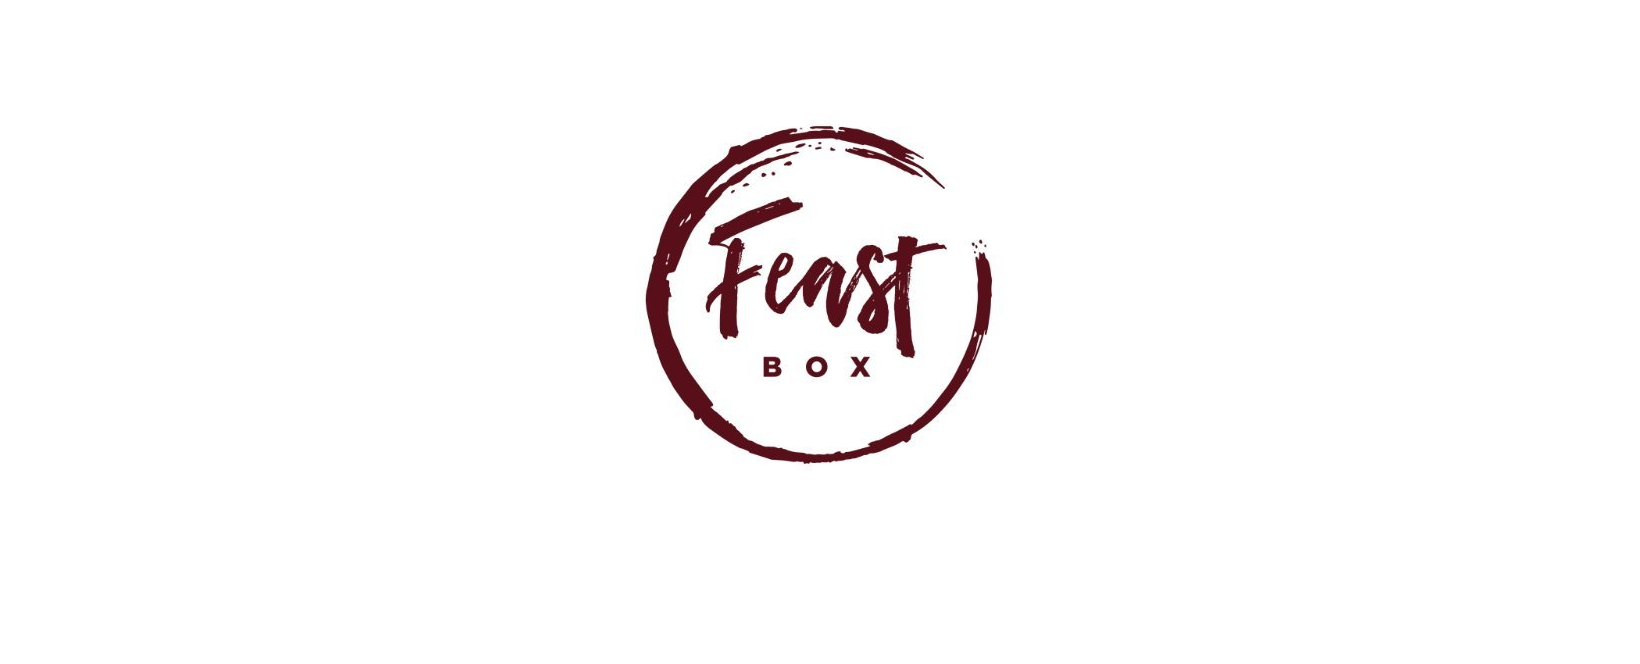 FeastBox Discount Codes 2022